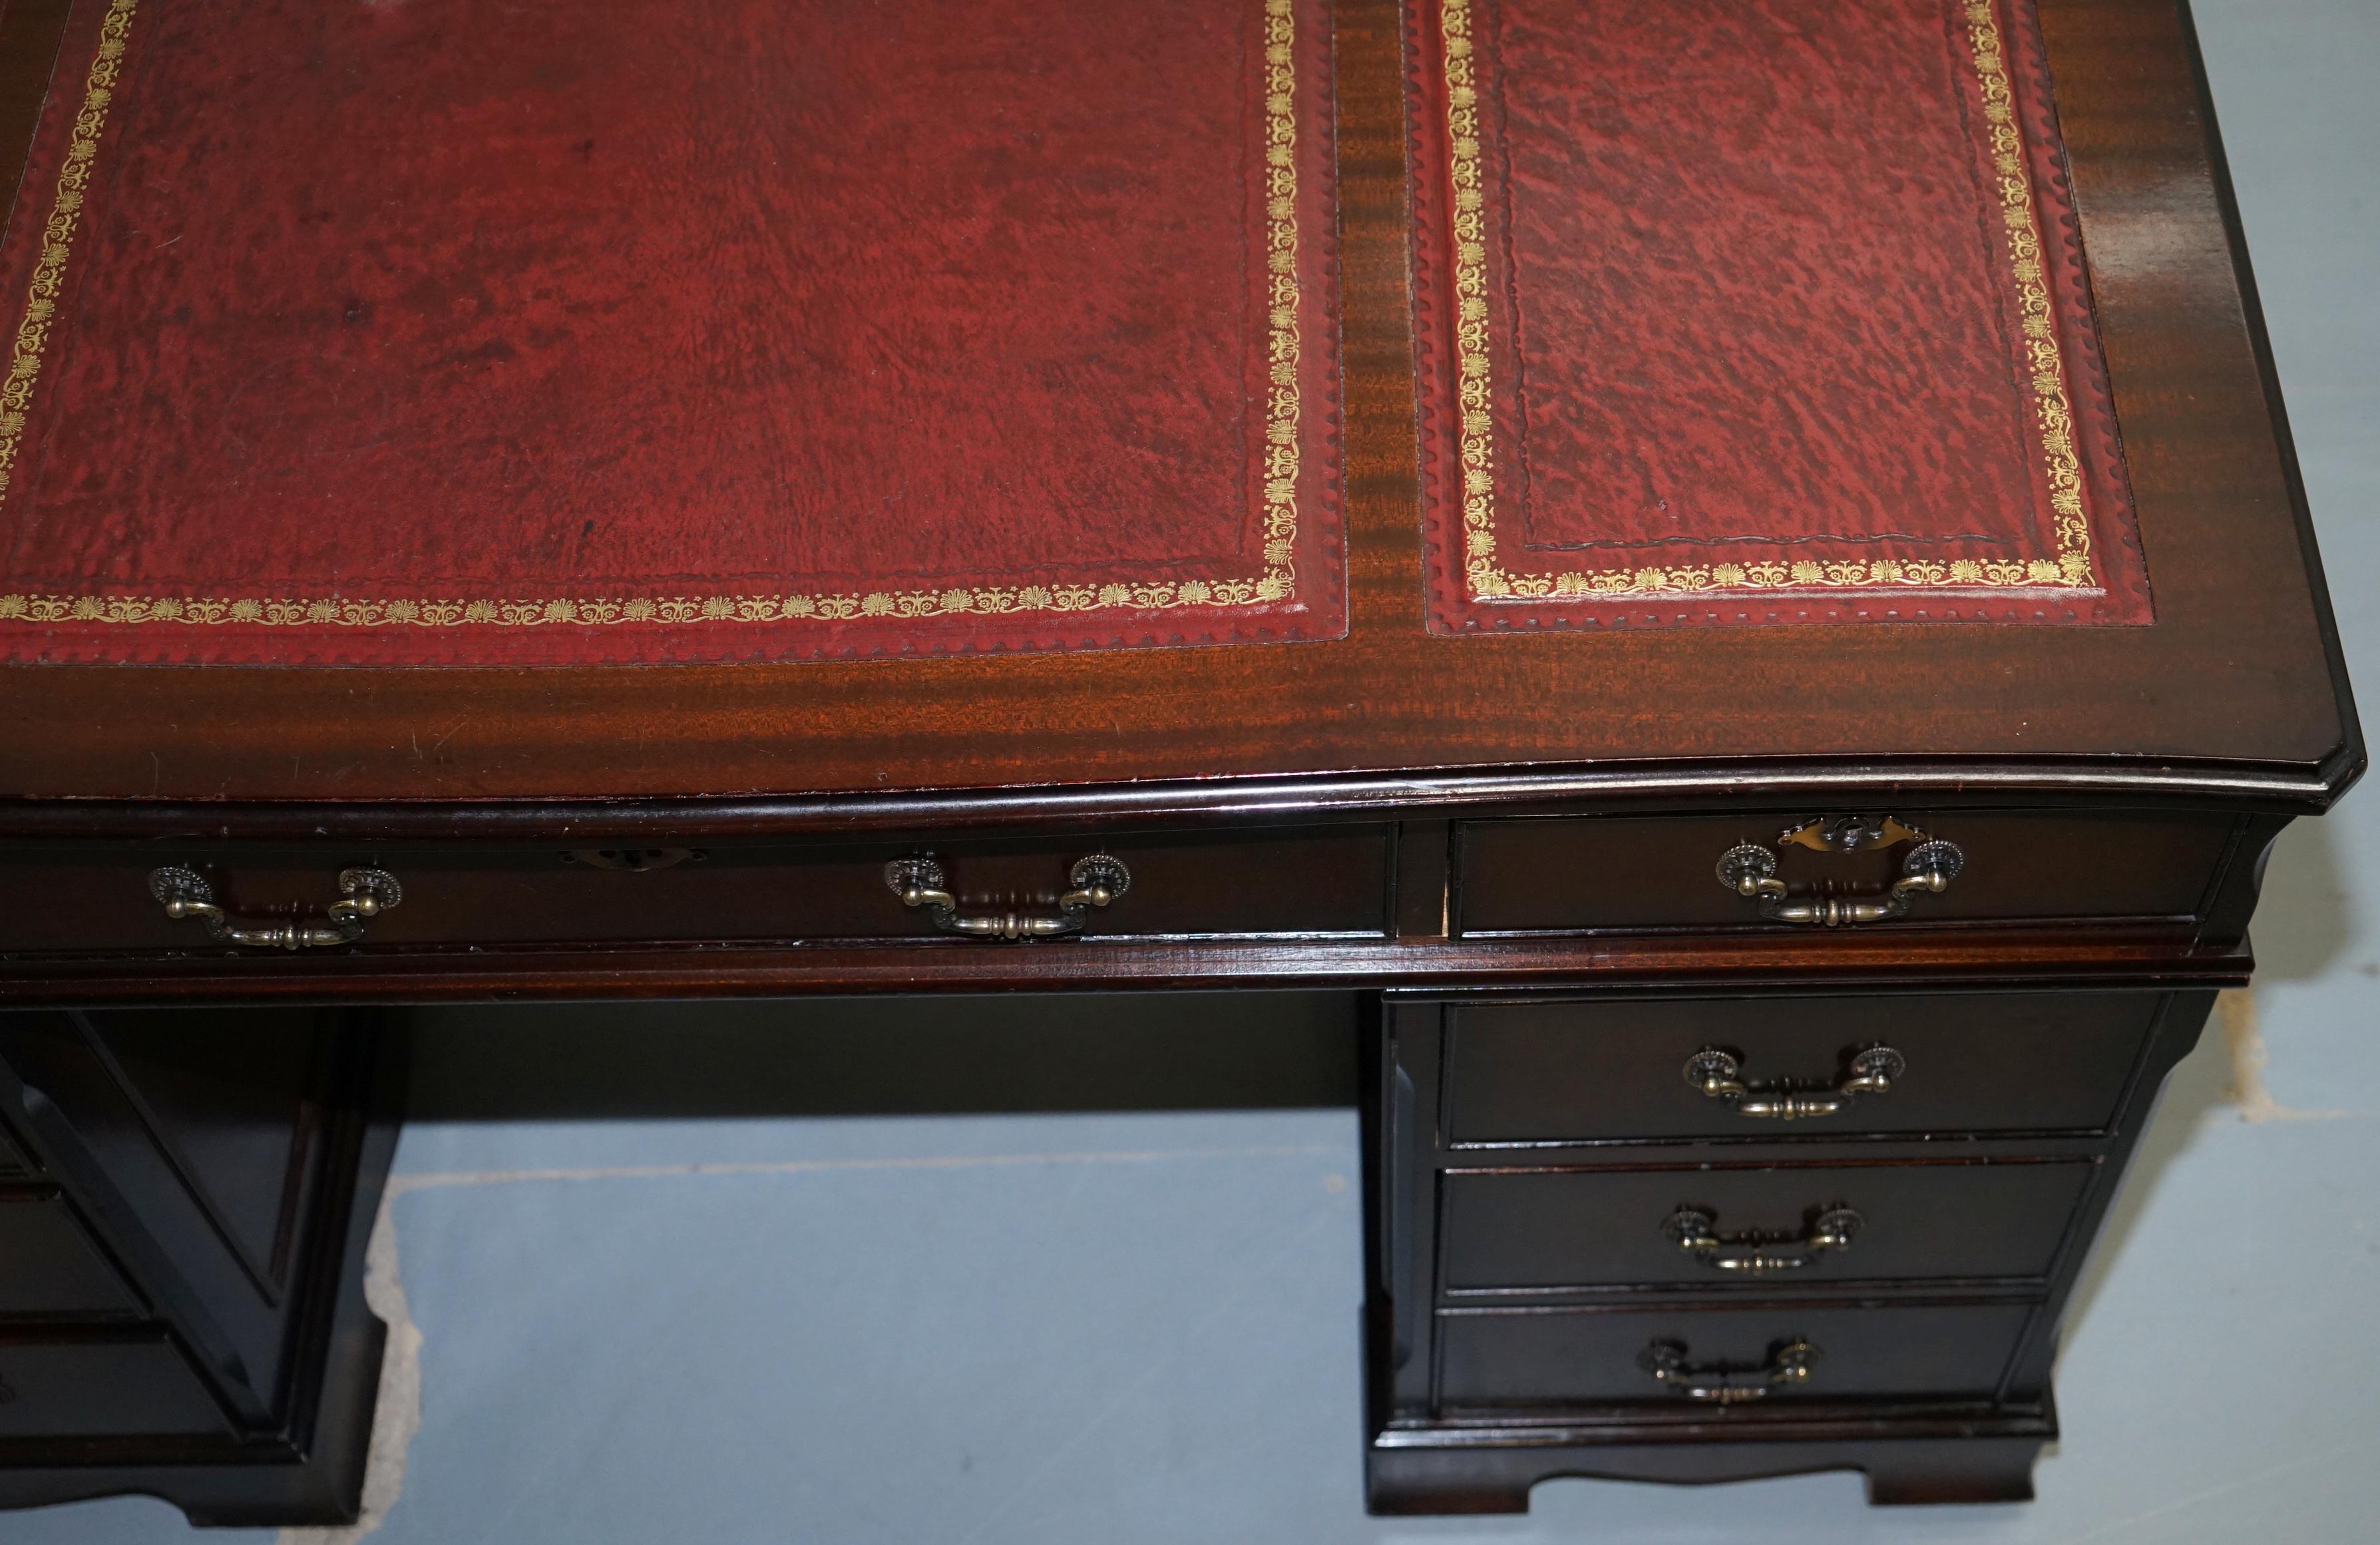 Lovely Solid Mahogany Twin Pedestal Partner Desk Oxblood Leather Writing Surface 3